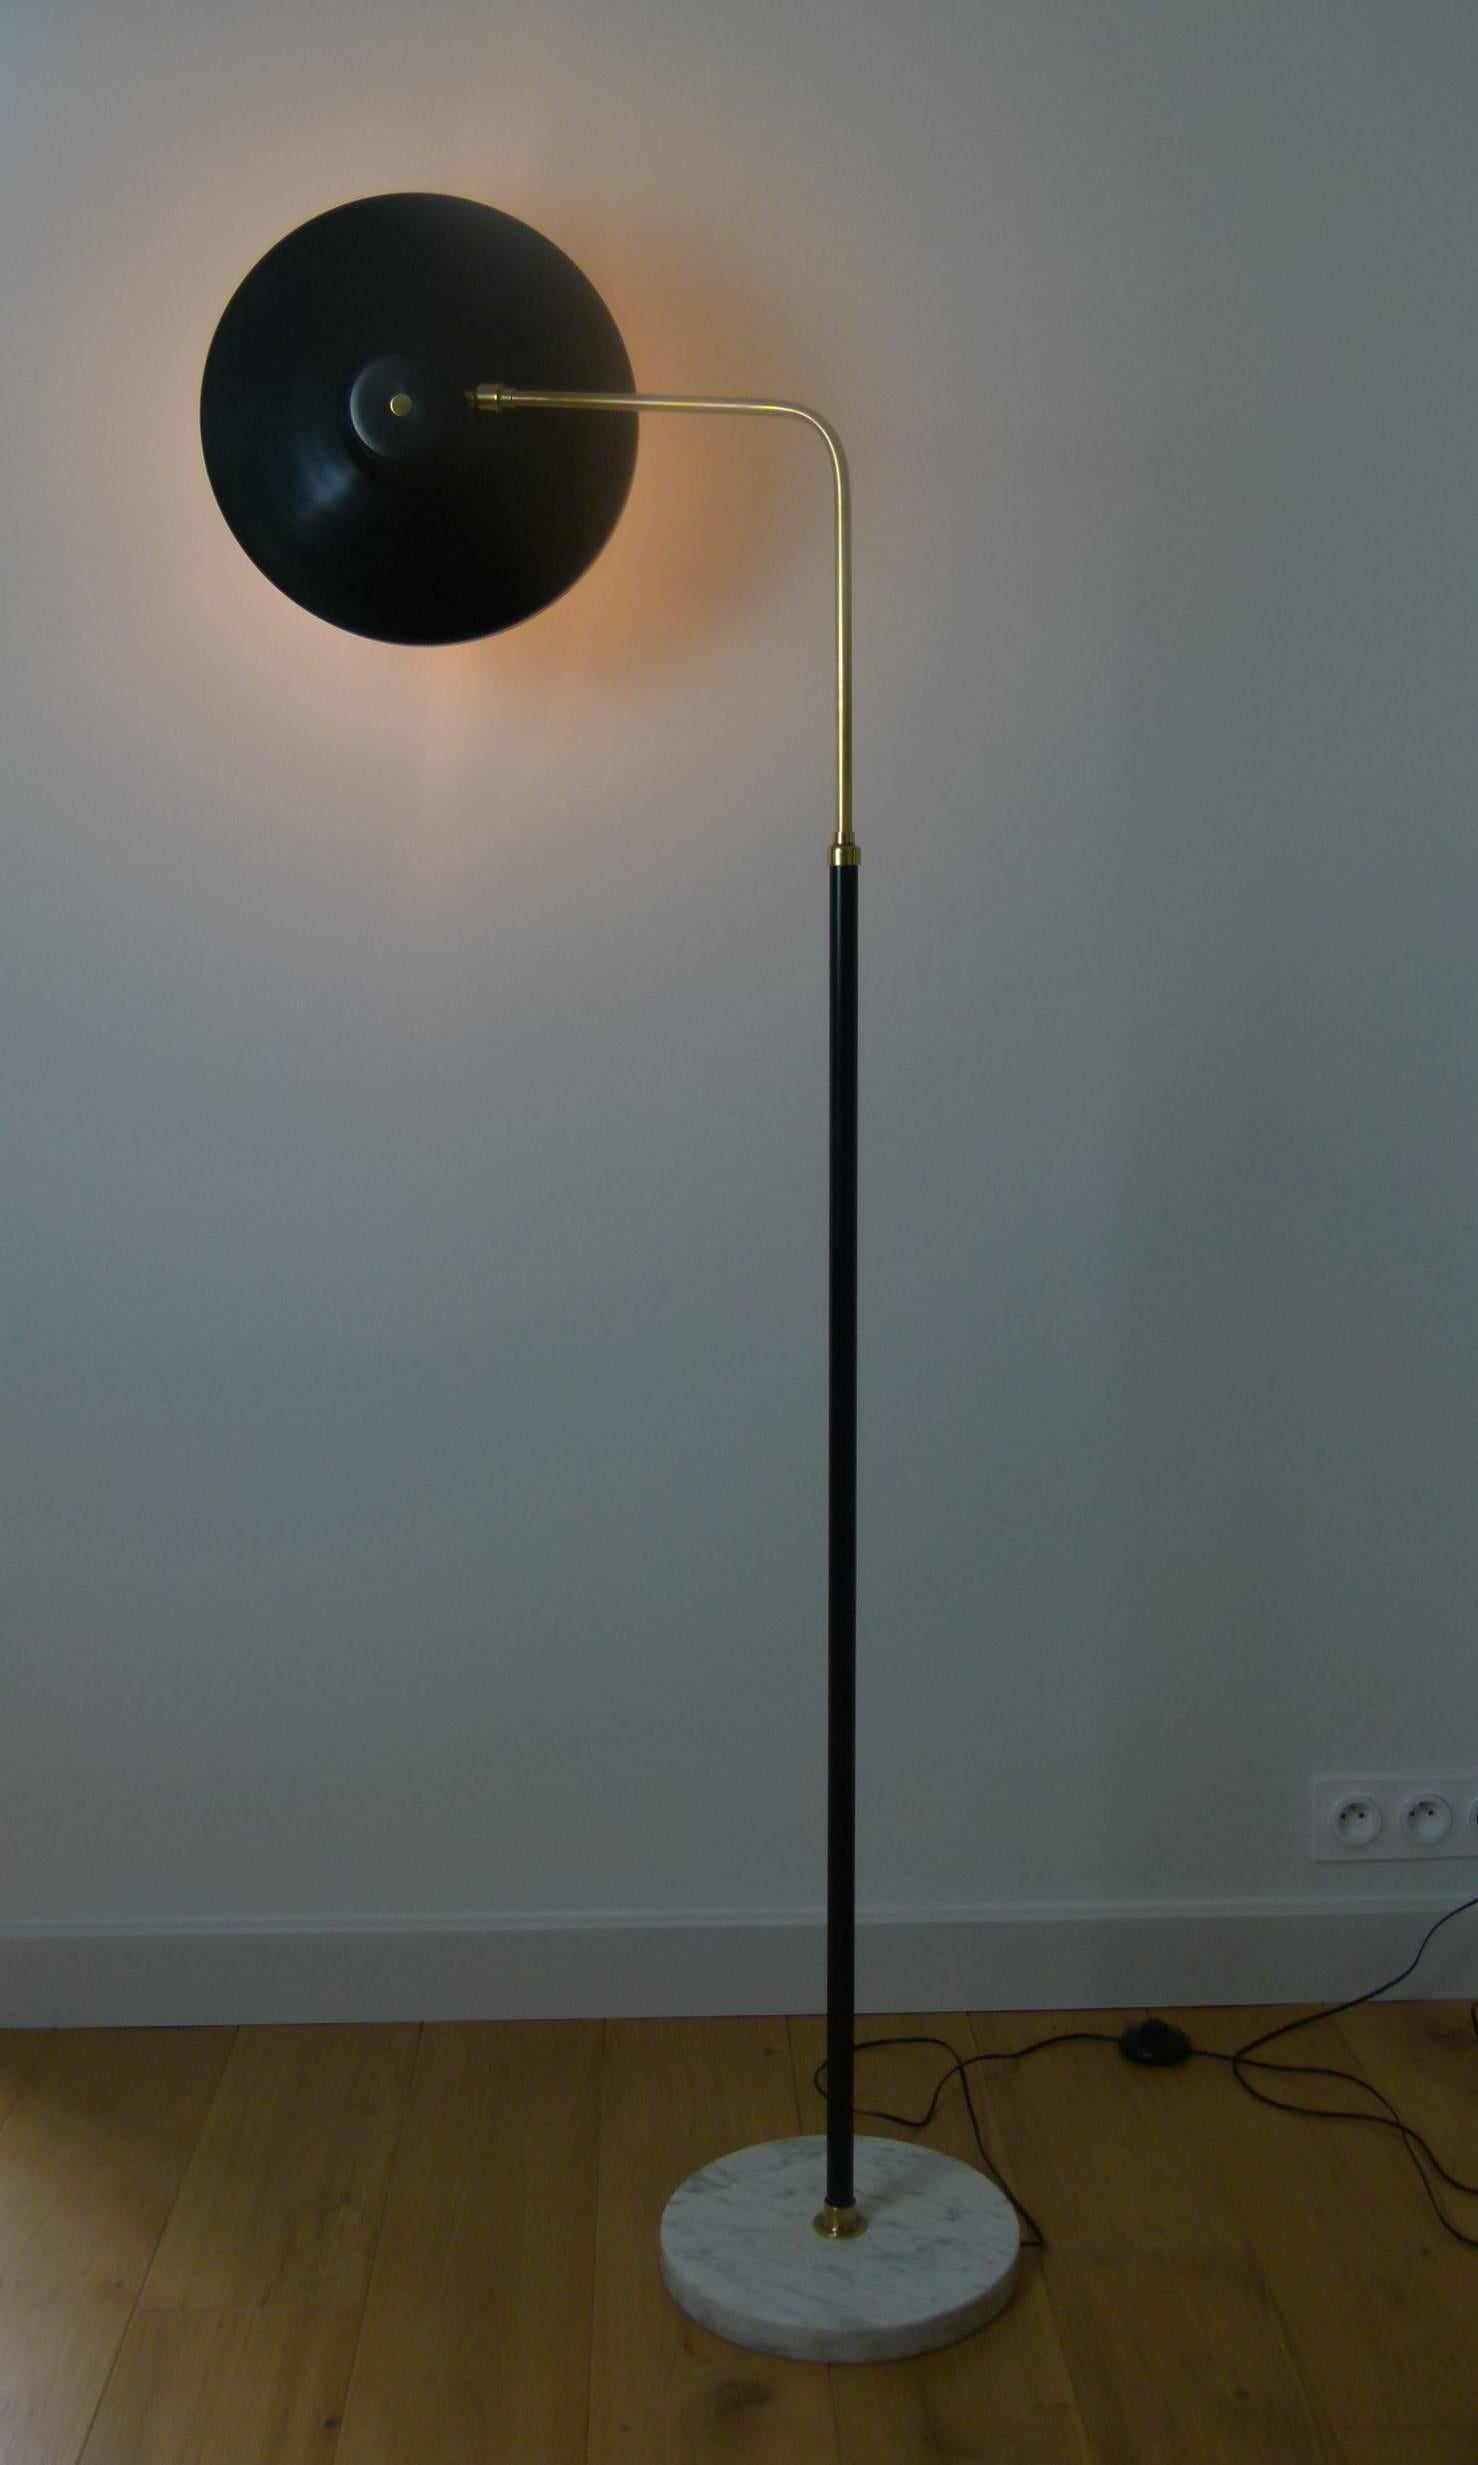 Italian floor lamp in marble, lacquered metal and brass composed of a circular base in marble Italian white veined black on which is set a black lacquered metal trunk mounted on a ring of brass, surmounted by a bended lighted arm with adjustable